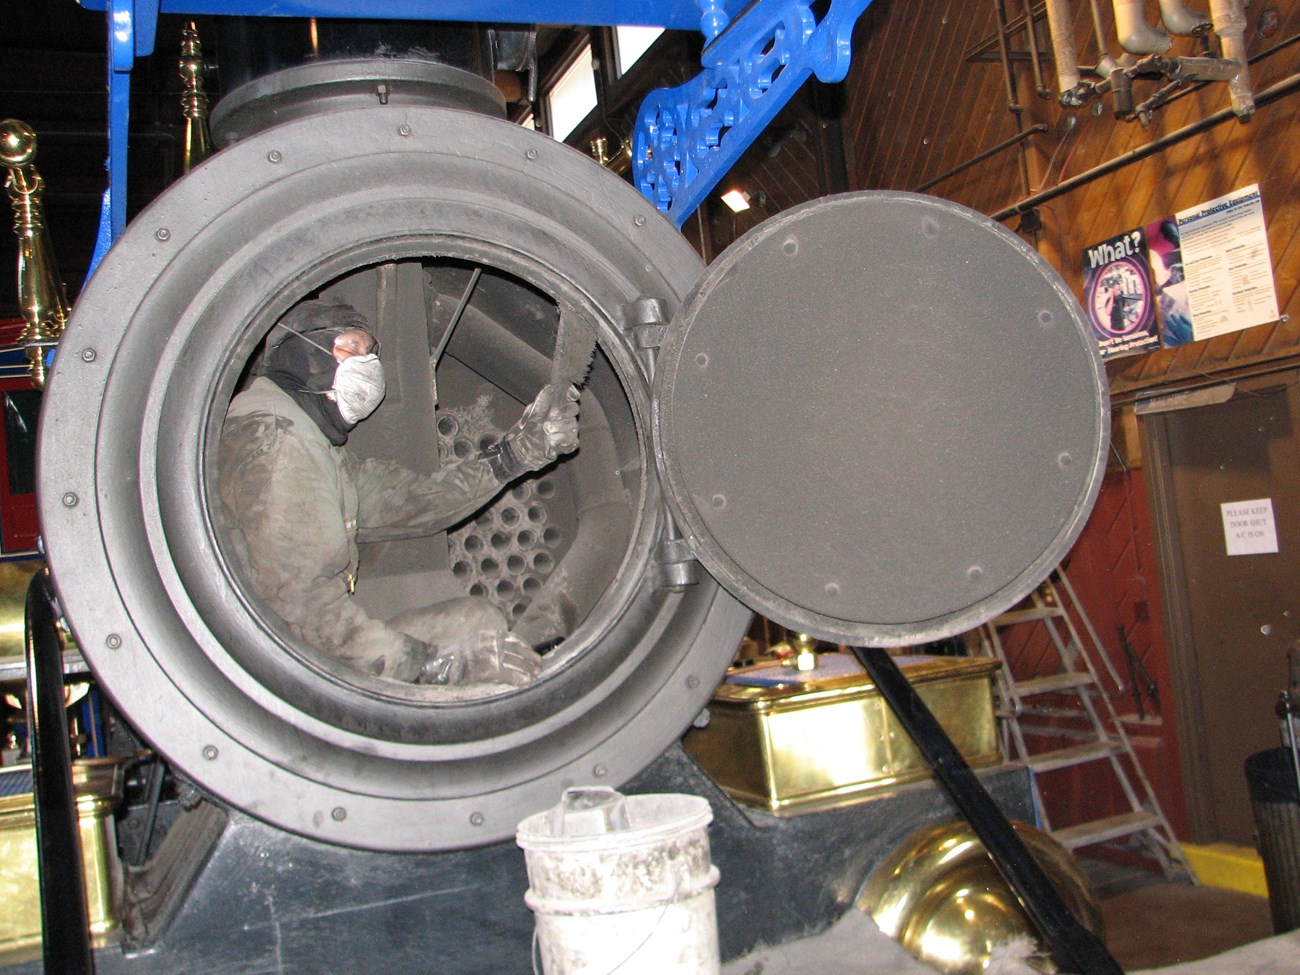 Person sitting inside the Jupiter smokebox, cleaning it with a brush. Boiler tubes can be seen behind him.